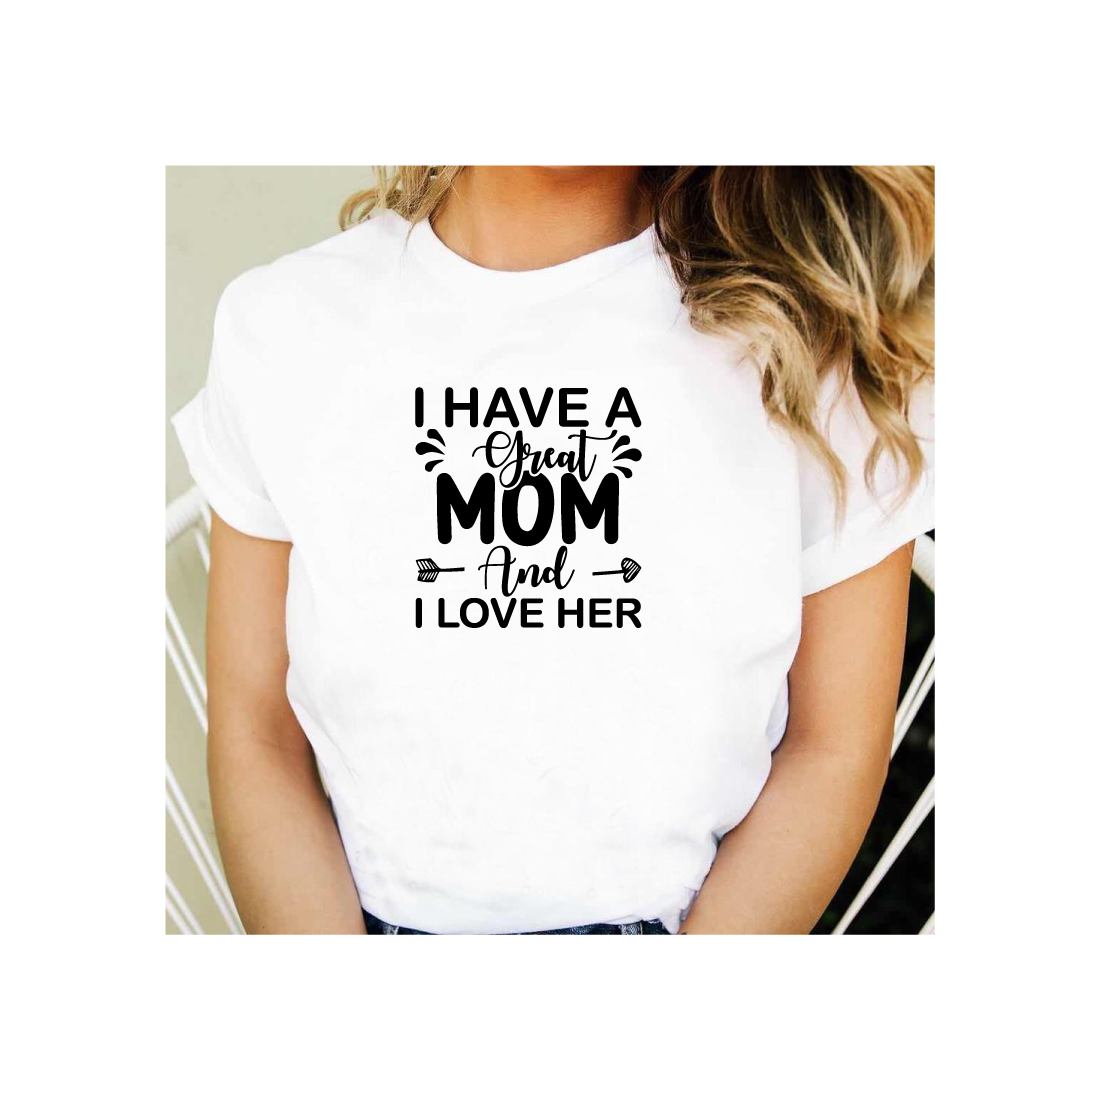 Woman wearing a t - shirt that says i have a great mom and i.